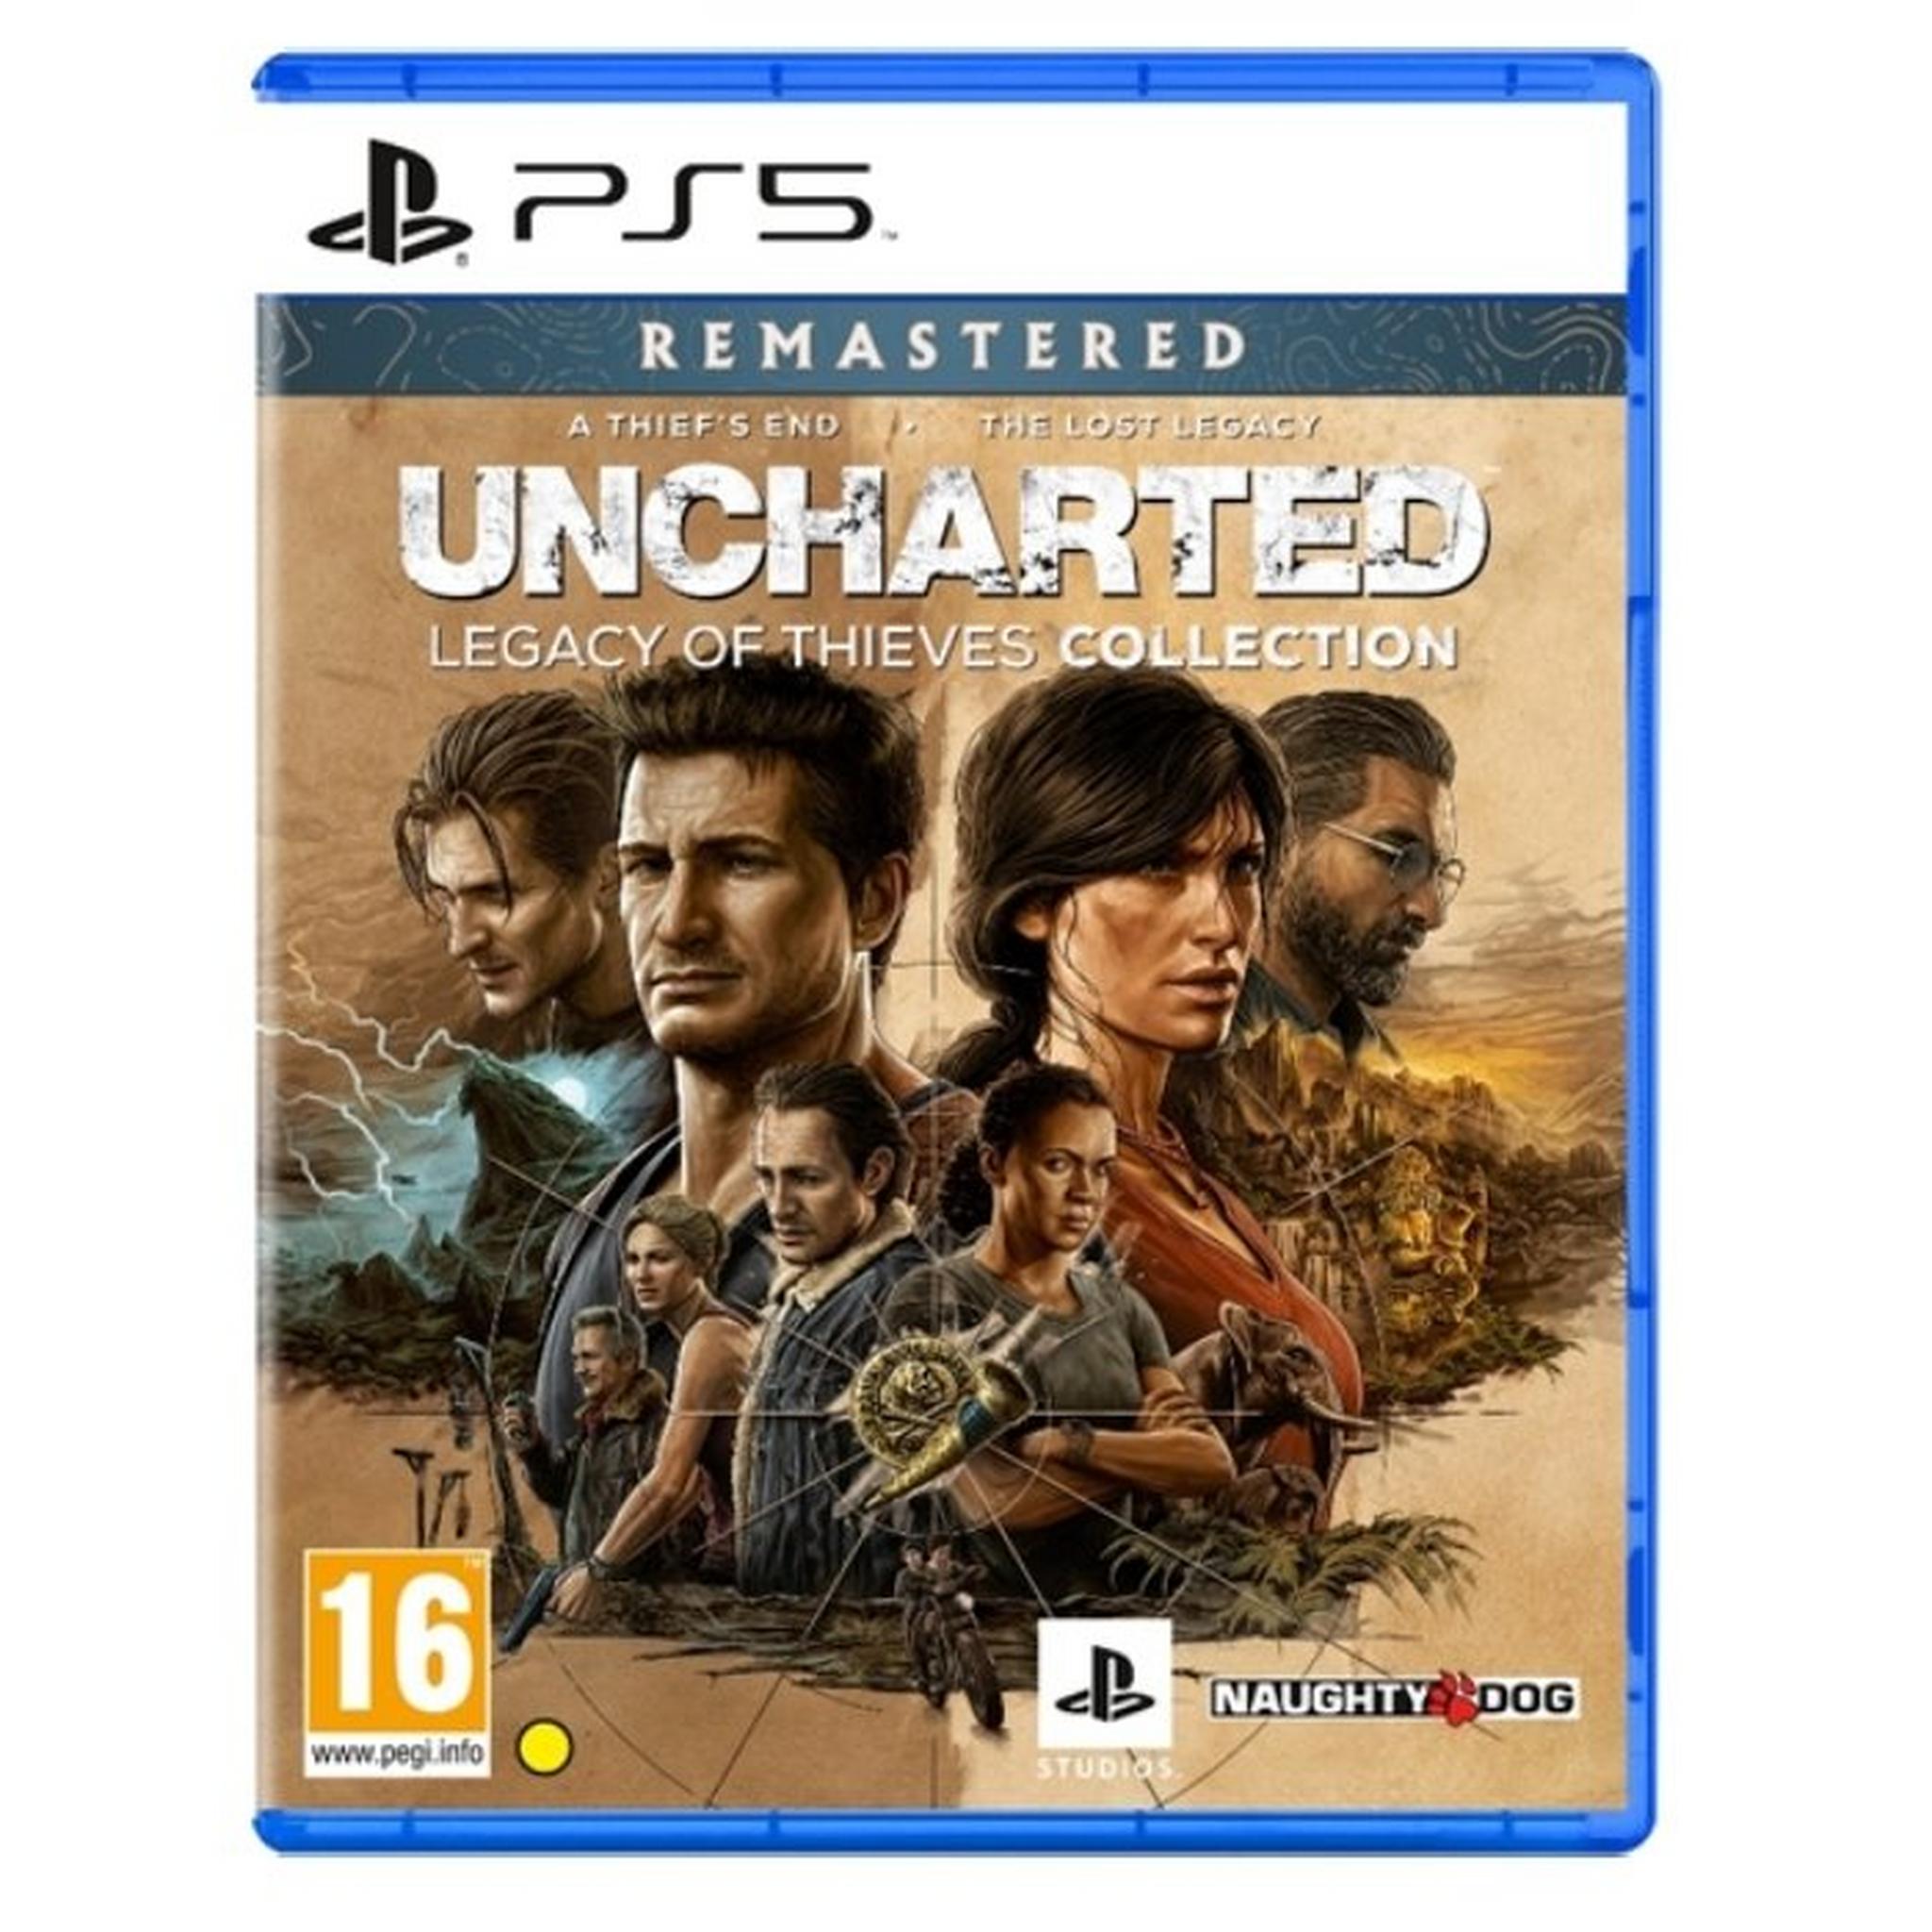 Uncharted: Legacy of Thieves Collection - PS5 Game